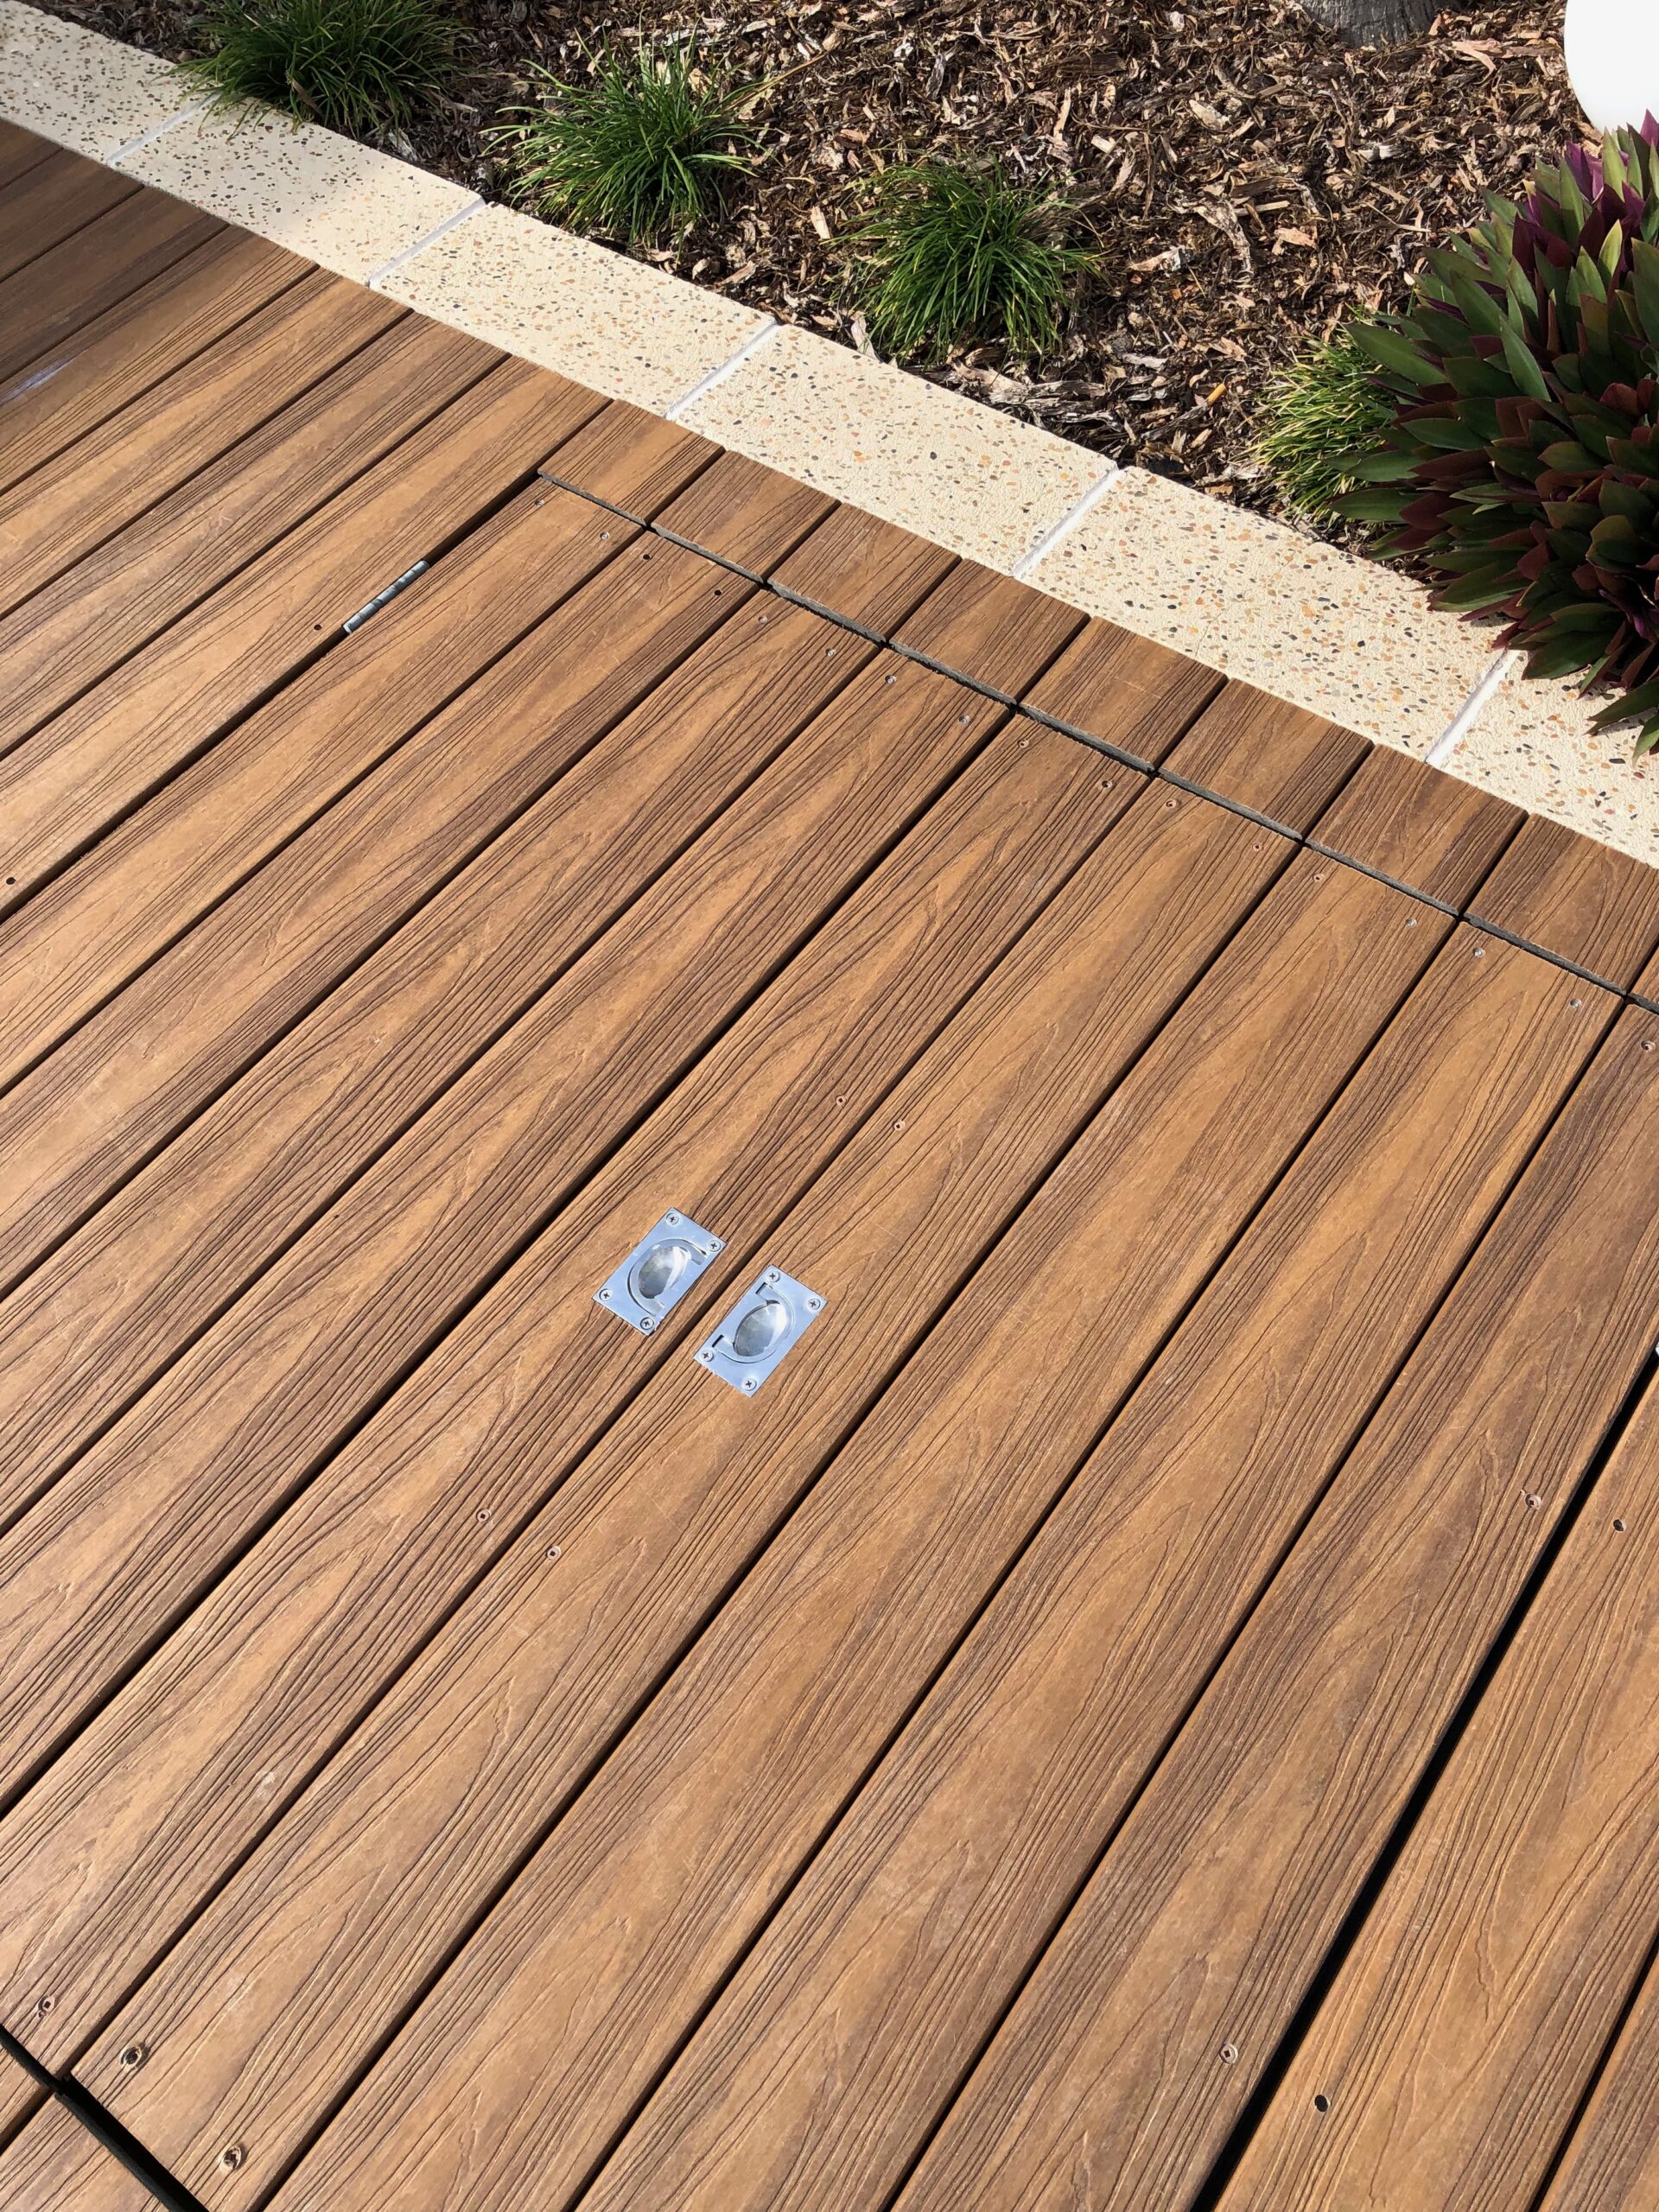 What is composite decking?